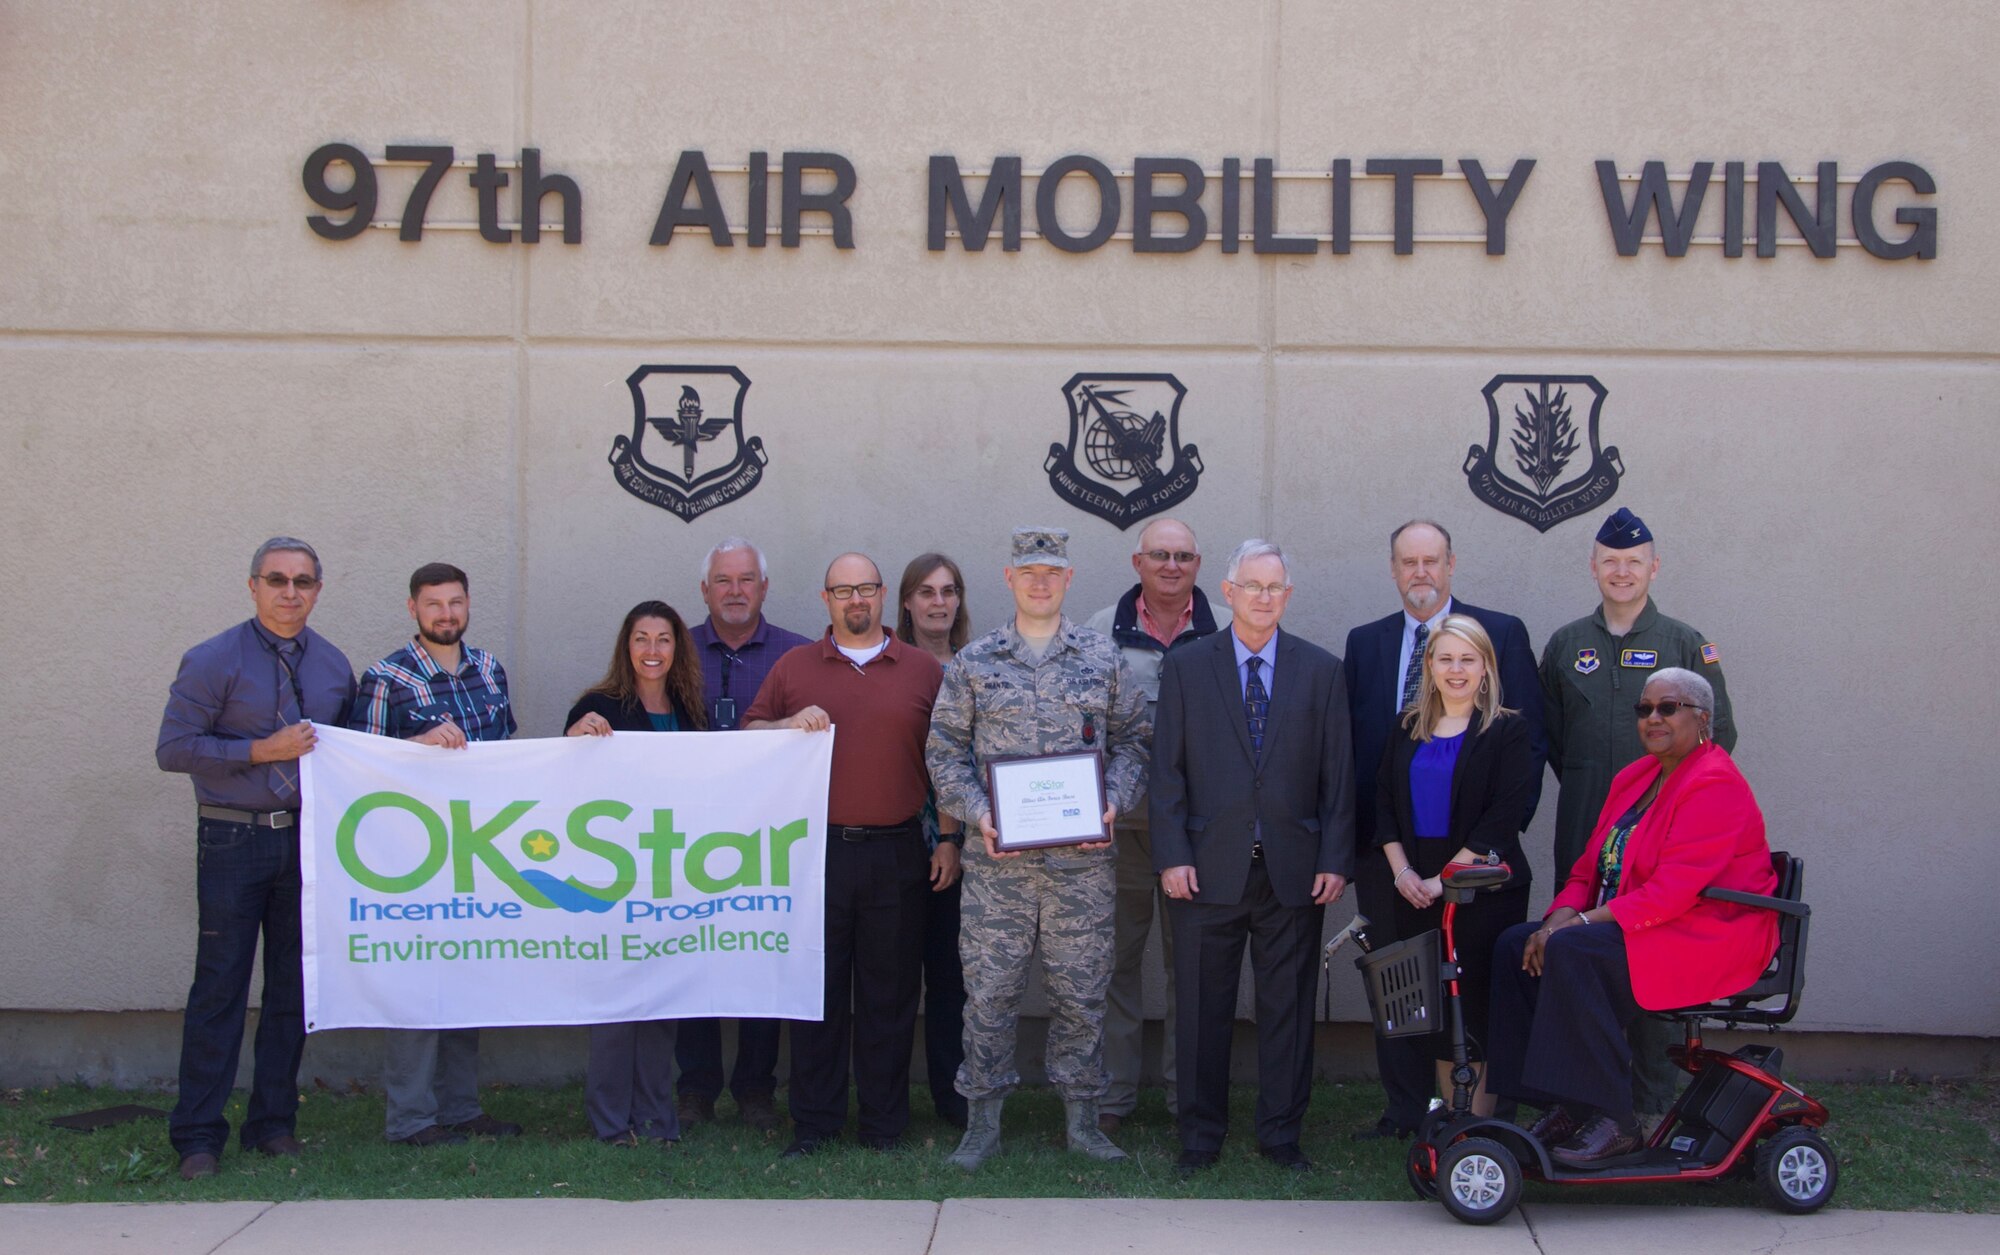 The 97th Civil Engineer Environmental Management Flight receives the Oklahoma Star, Platinum Star, award by the Oklahoma Department of Environmental Quality, joined by U.S. Air Force Col. Paul Skipworth, a vice commander assigned to the 97th Air Mobility Wing, and Col. Paul Frantz, a squadron commander assigned to the 97th CES, May 2, 2018, at Altus Air Force Base, Okla.